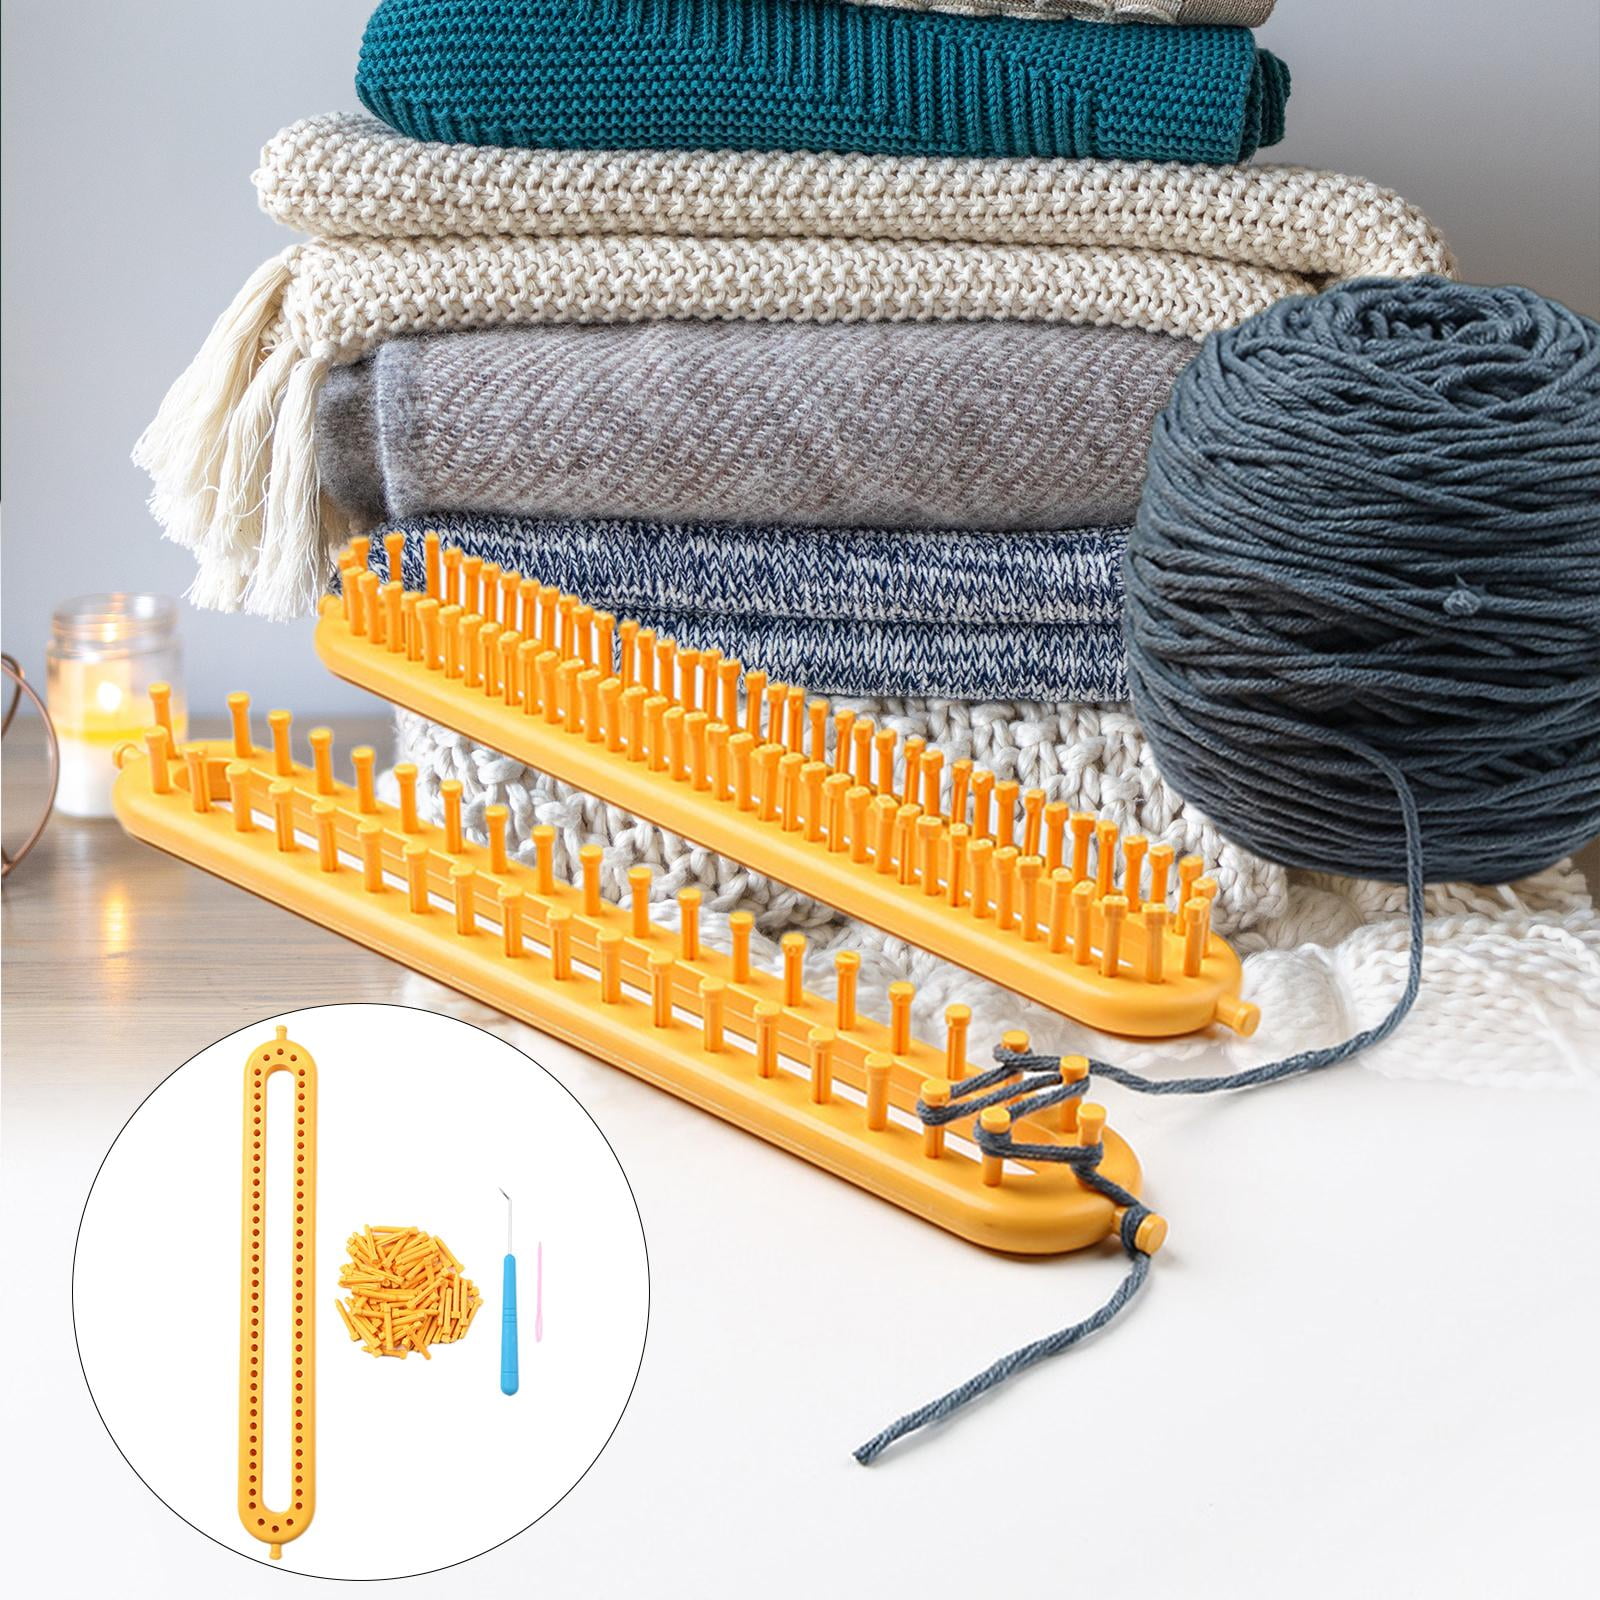 DIY Sweater Knitting Machine With Crochet Hooks Sewing Twisted Cord Trim  Kit For Rectangular Weaving Of Scarves, Hats, Shawls, And More 230821 From  Tuo10, $7.92